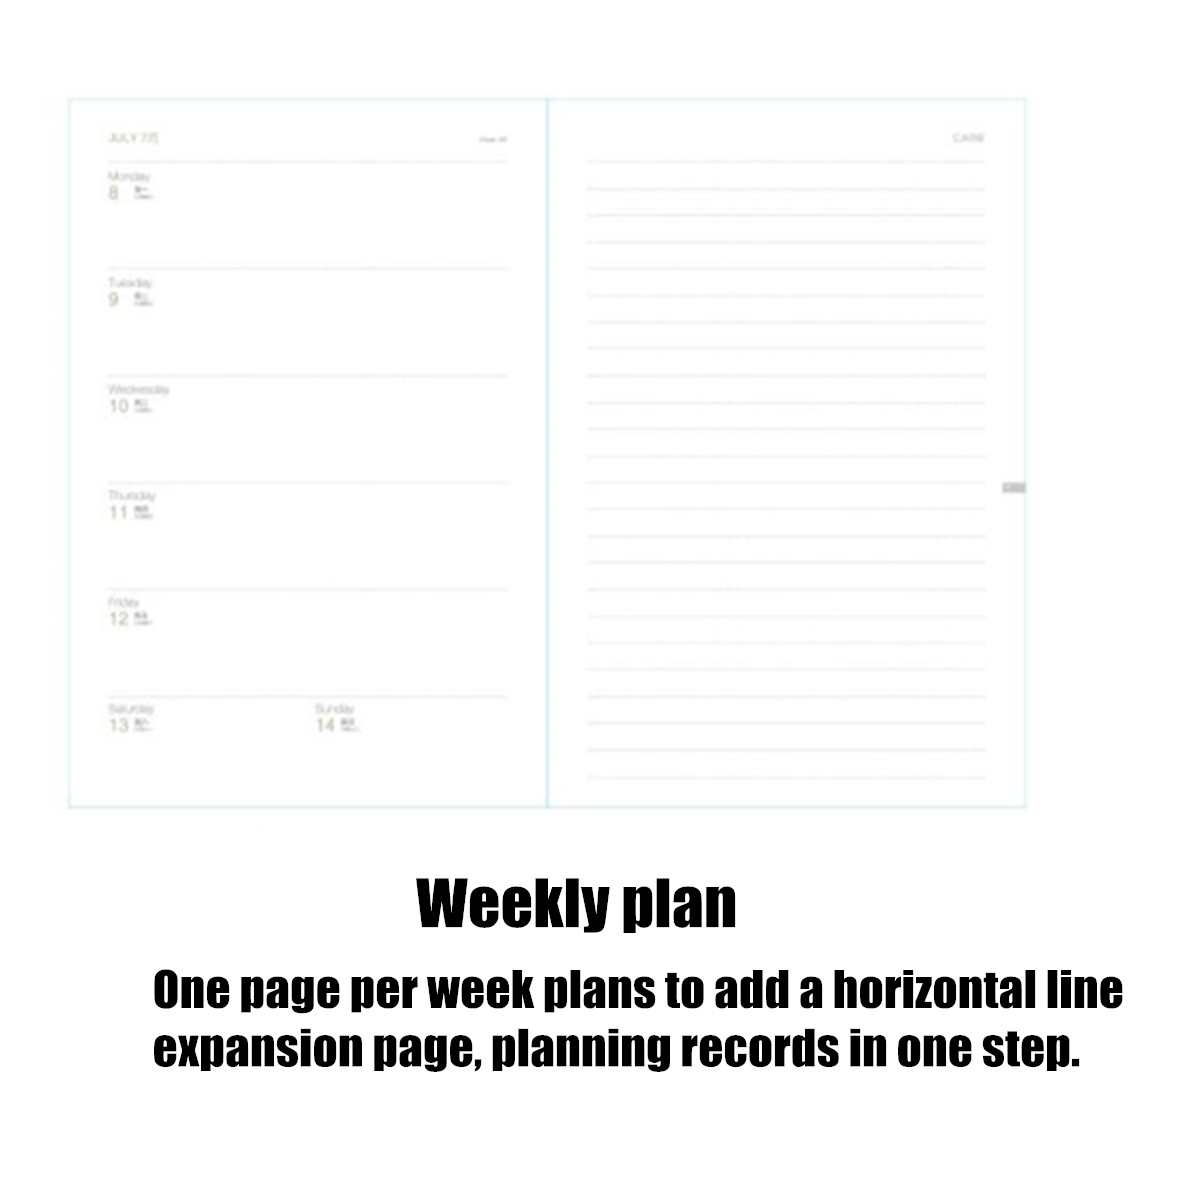 2019-2020-Weekly-Monthly-Agenda-Planner-Monthly-Weekly-Plan-Portable-Notebook-Cute-Diary-Flower-Sche-1530952-9